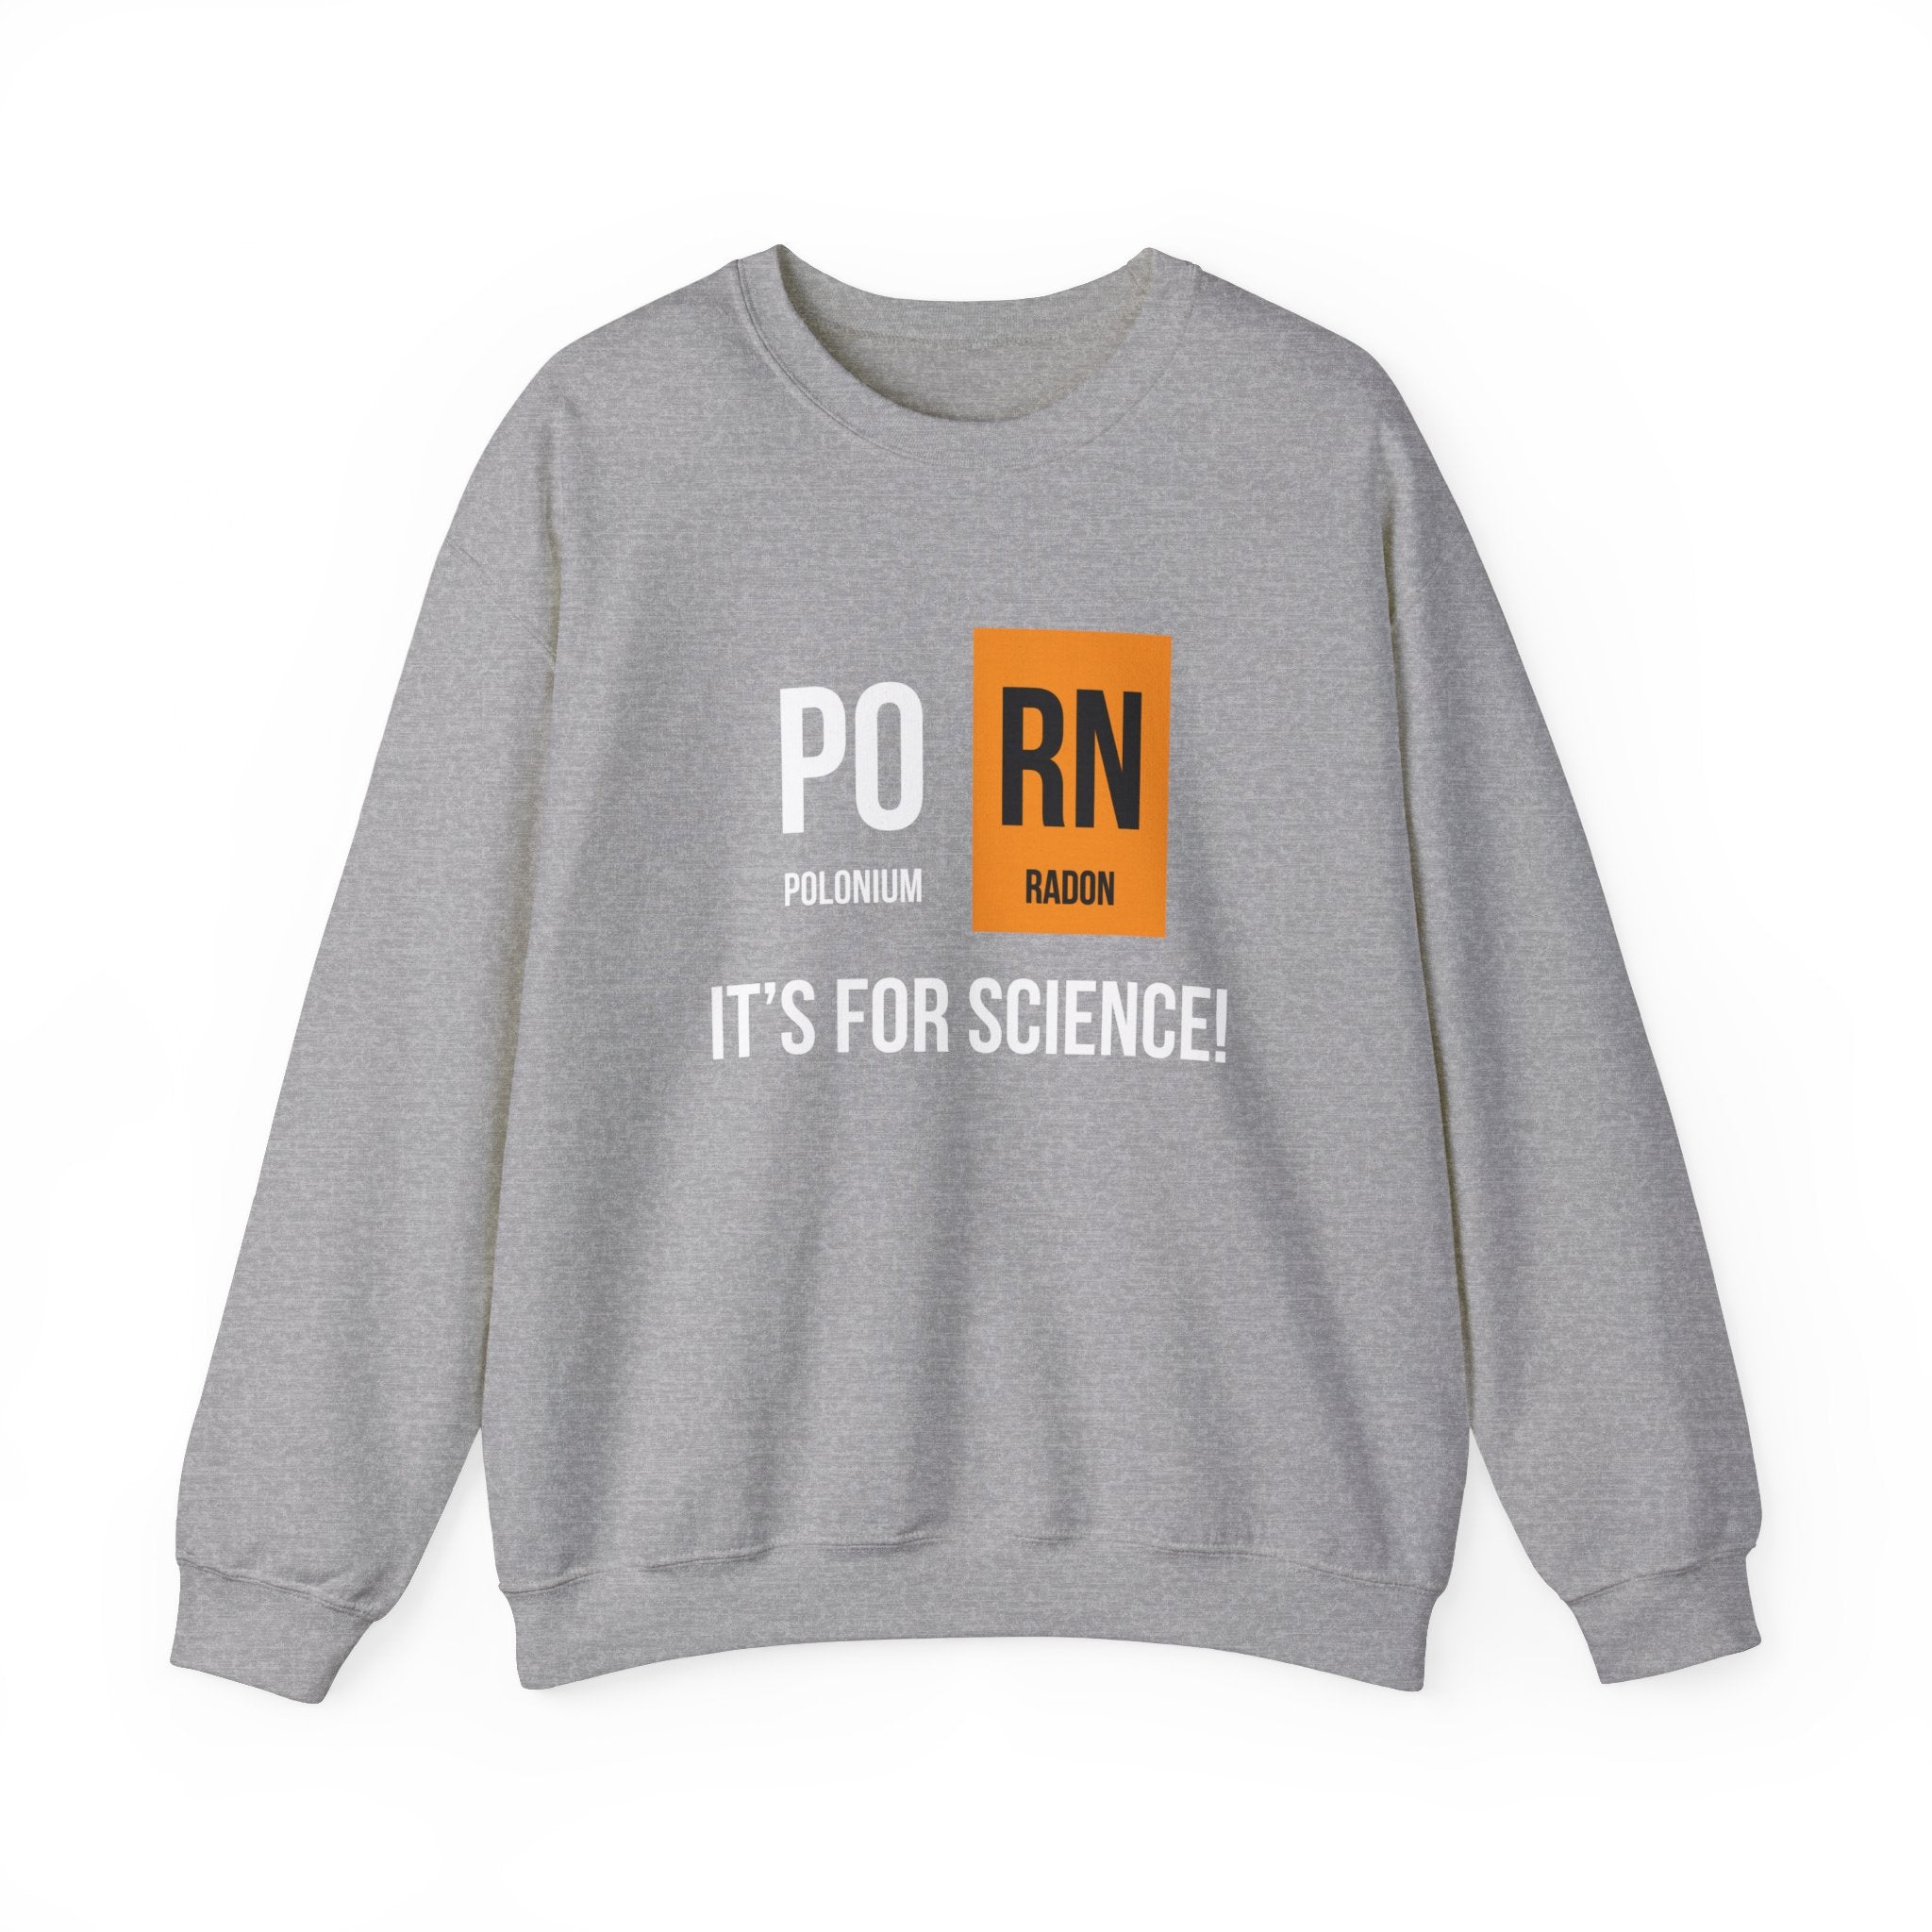 A gray PO-RN - Sweatshirt featuring the words "Polonium" and "Radon" with their respective chemical symbols, "PO" and "RN," and the phrase "It's for Science!" below. It's the perfect choice for colder months.